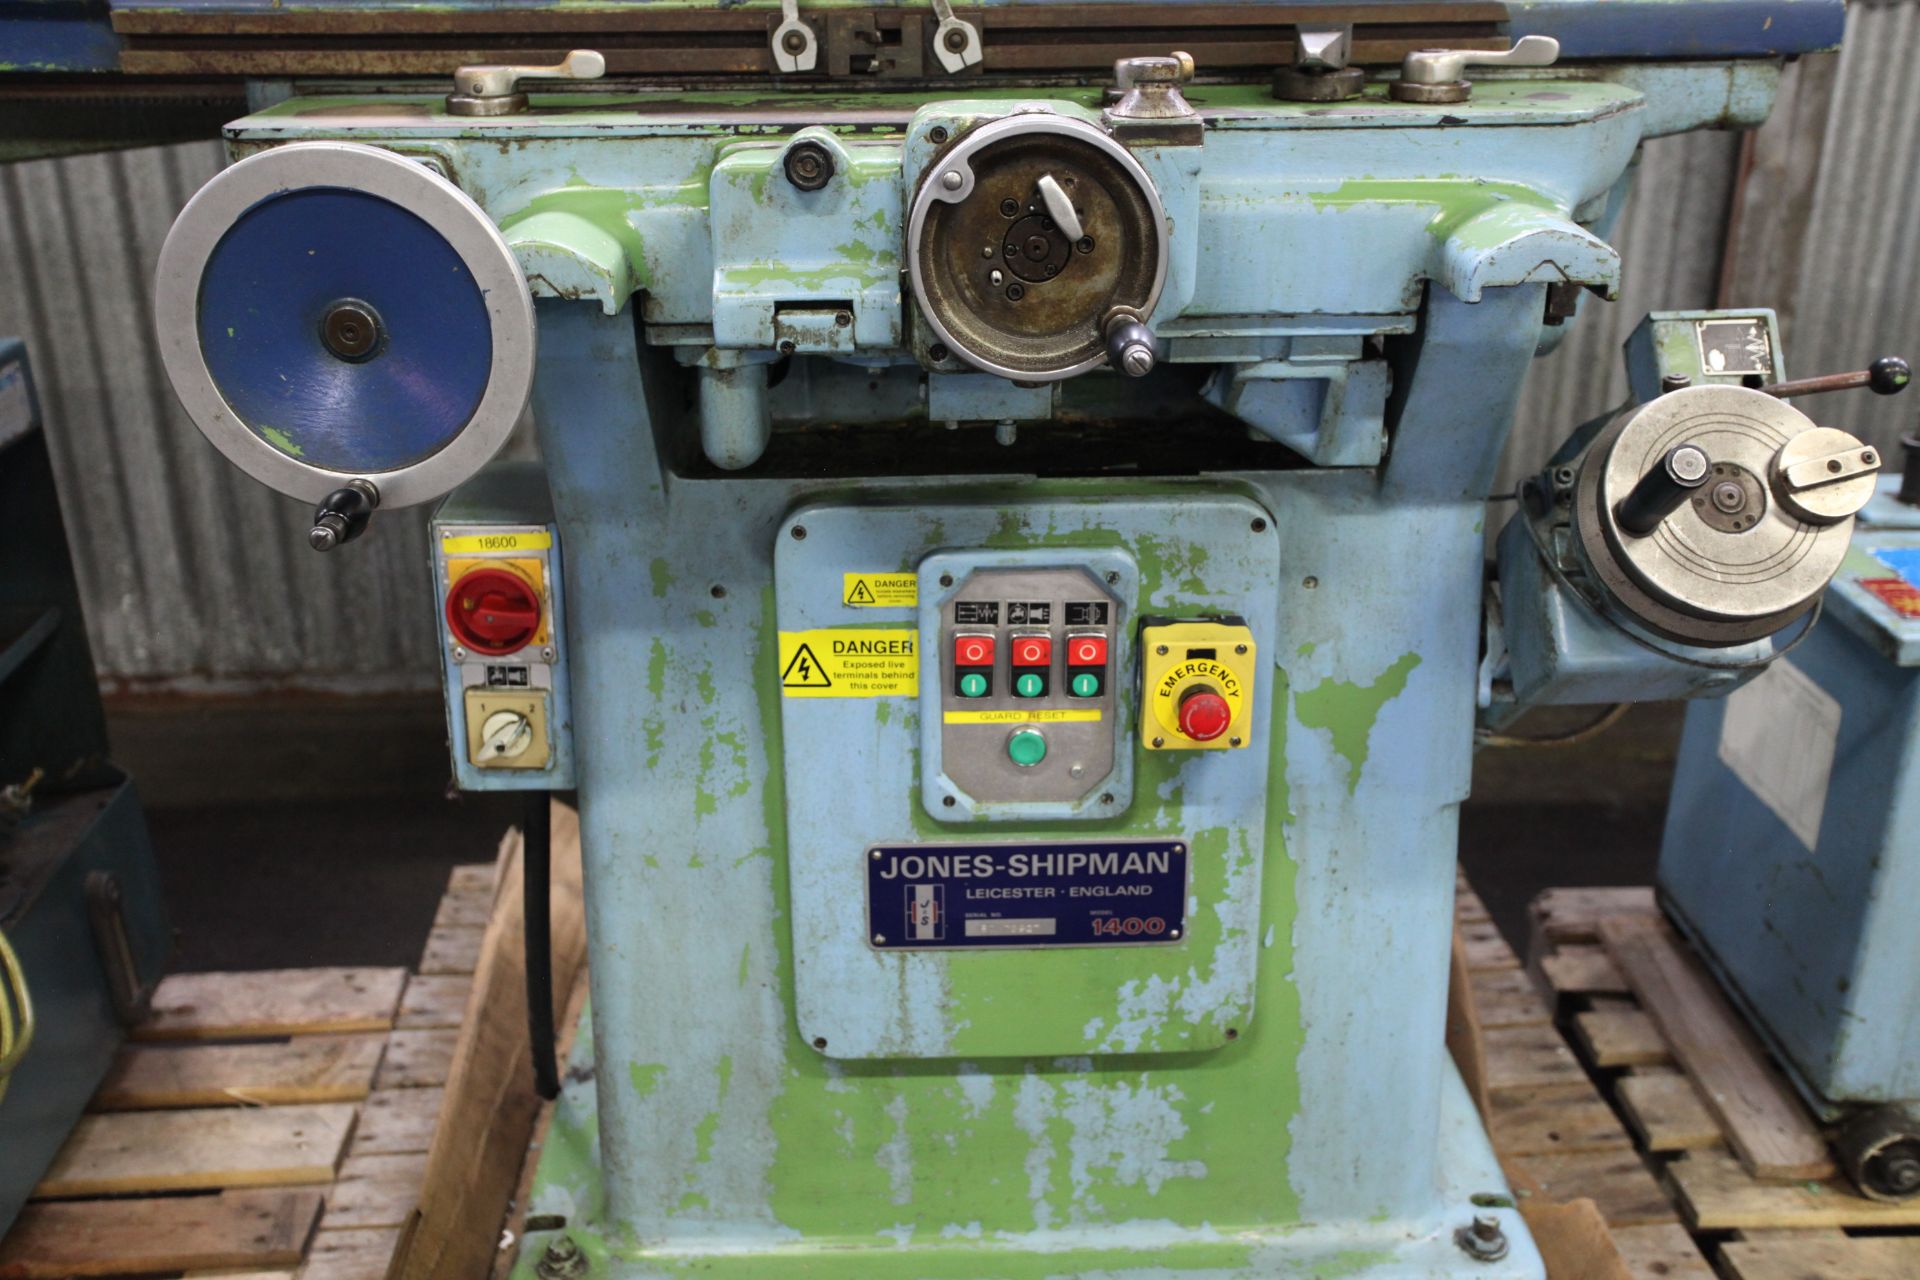 Jones & Shipman 1400 Surface Grinder, serial no. BO 78927, free loading onto purchasers - Image 3 of 6